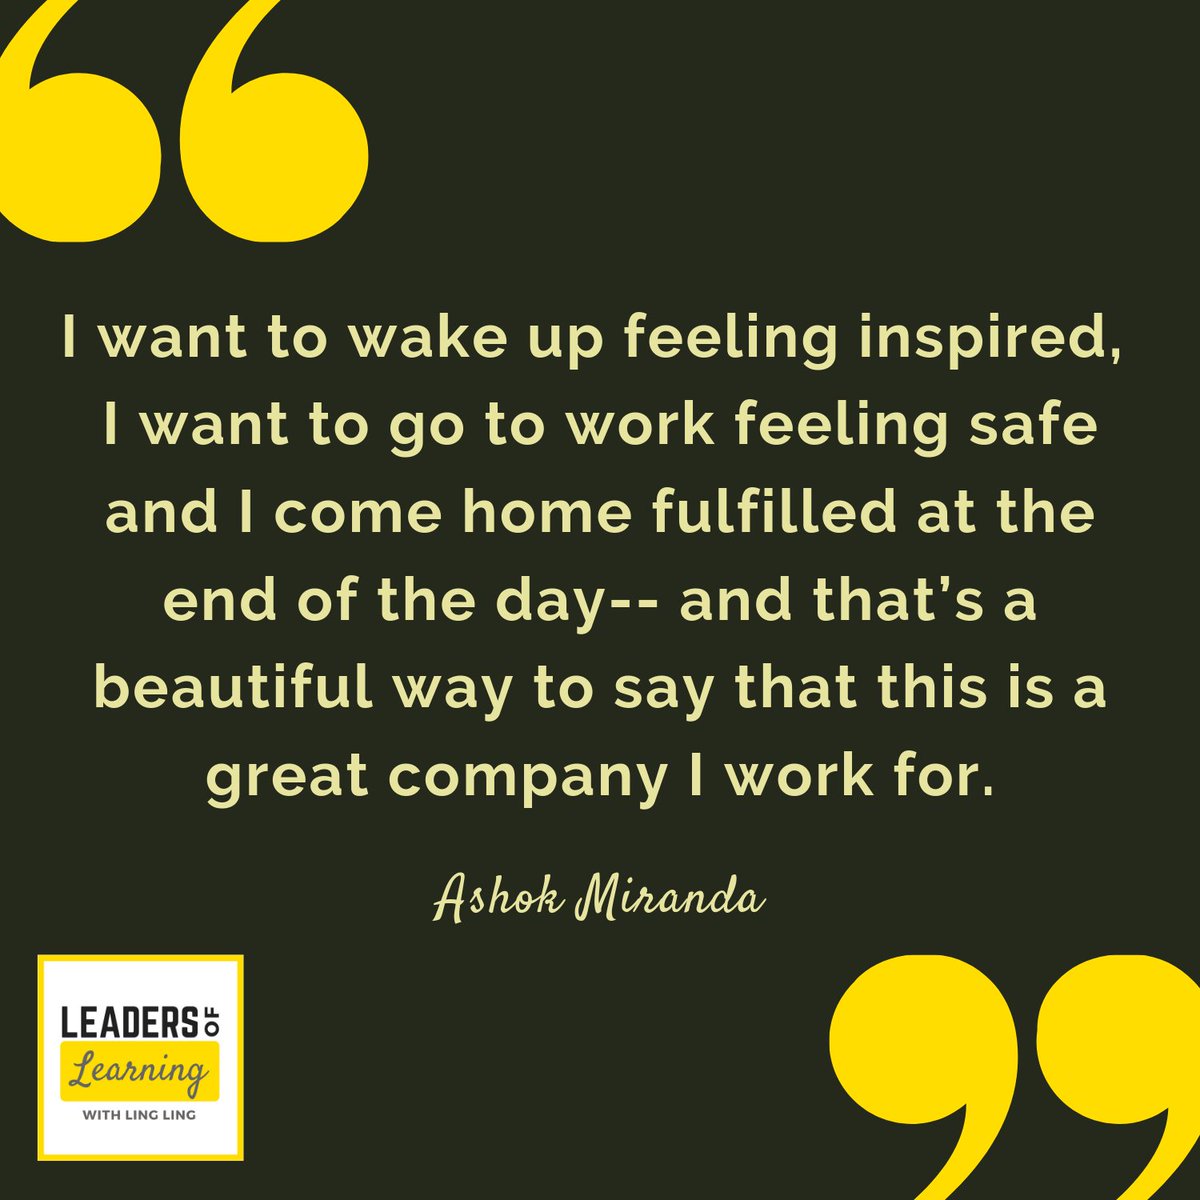 I want to wake up feeling inspired, I want to go to work feeling safe and I come home fulfilled at the end of the day. And that is a beautiful way to say that this is a great company I work for. ~ Ashok Miranda bit.ly/2YnluNB

#leadersoflearning
#quote 
#toxiccultures